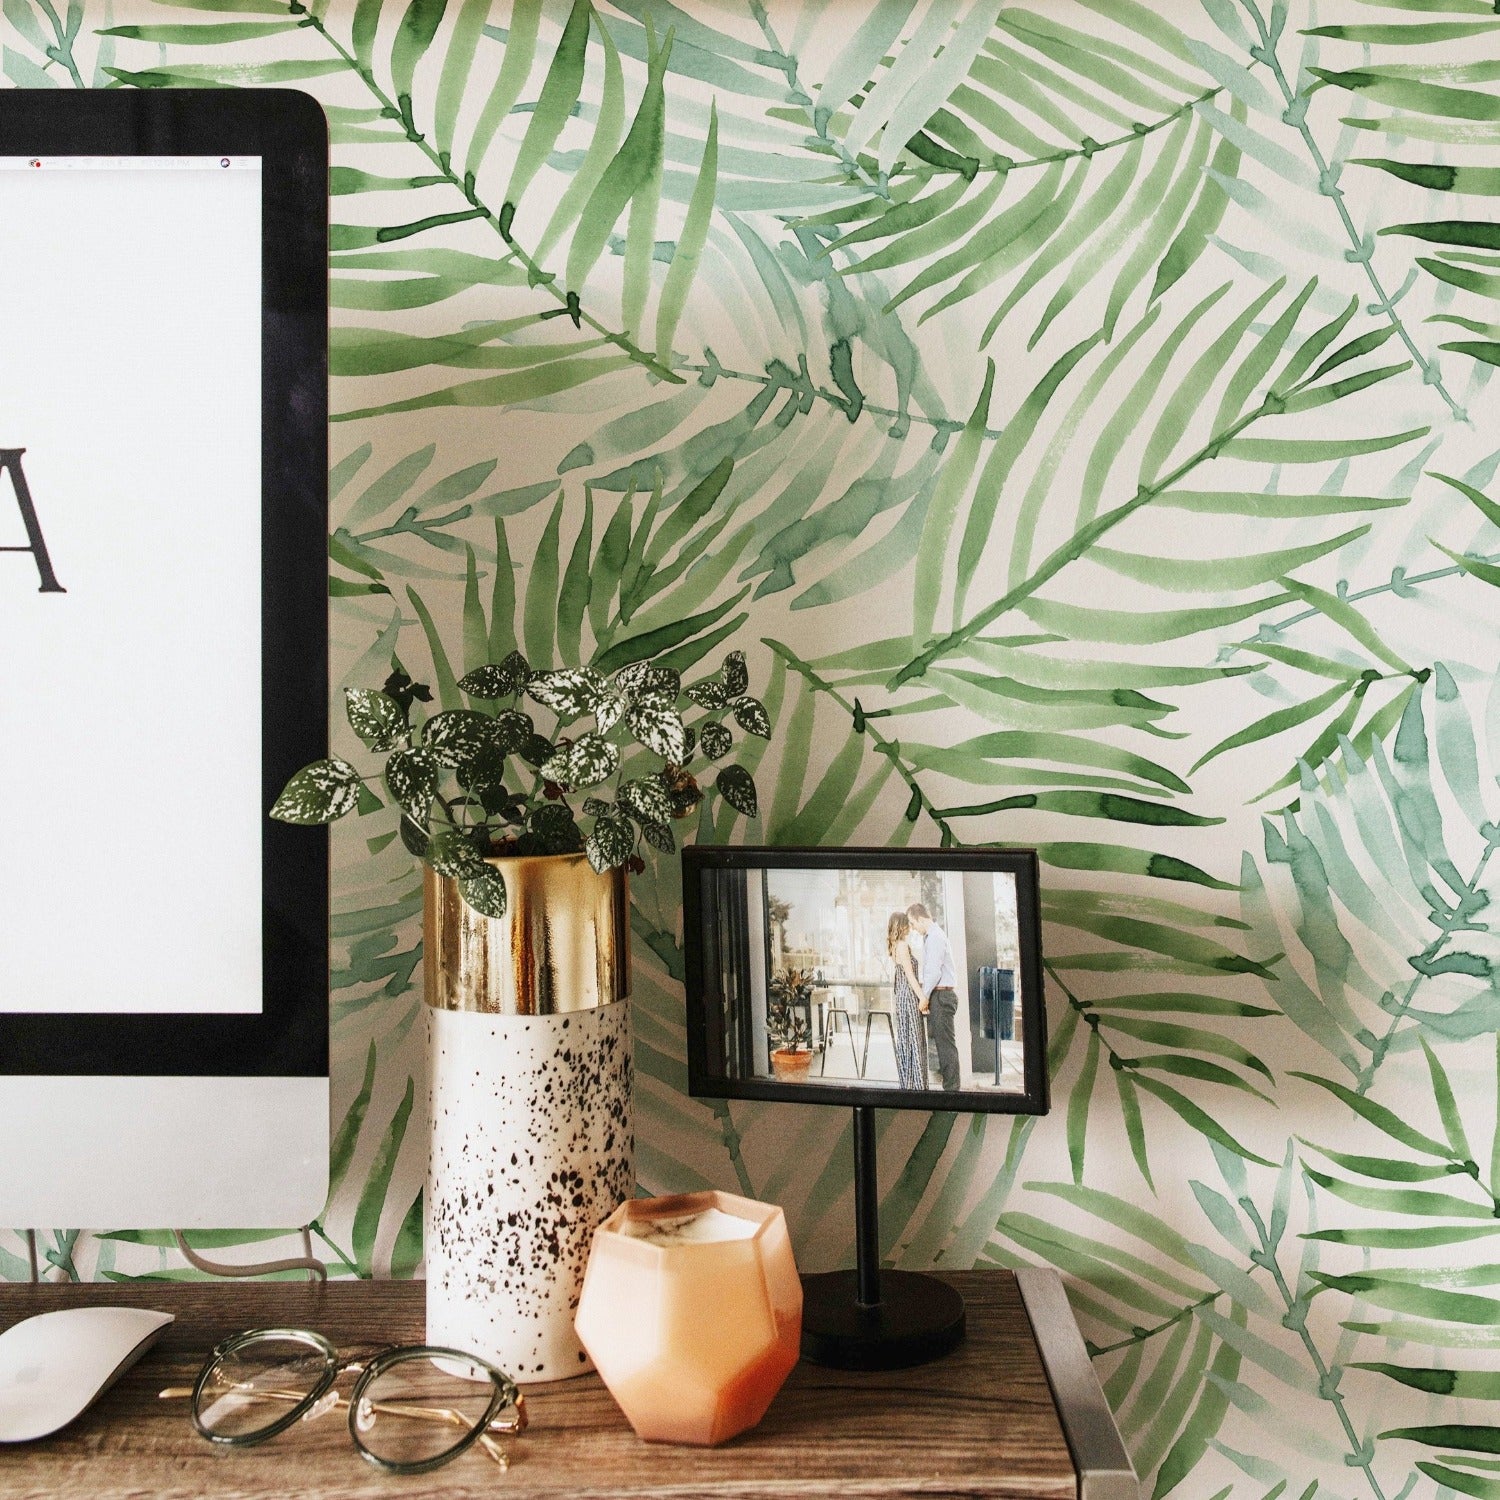 A cozy workspace is enlivened by the 'Hand Painted Tropical Wallpaper' featuring lush green watercolor palm leaves on a light background. The wallpaper brings a vibrant, organic feel to the area, complemented by a wooden shelf with a framed art print, books, and a modern computer setup with decorative vases and greenery.